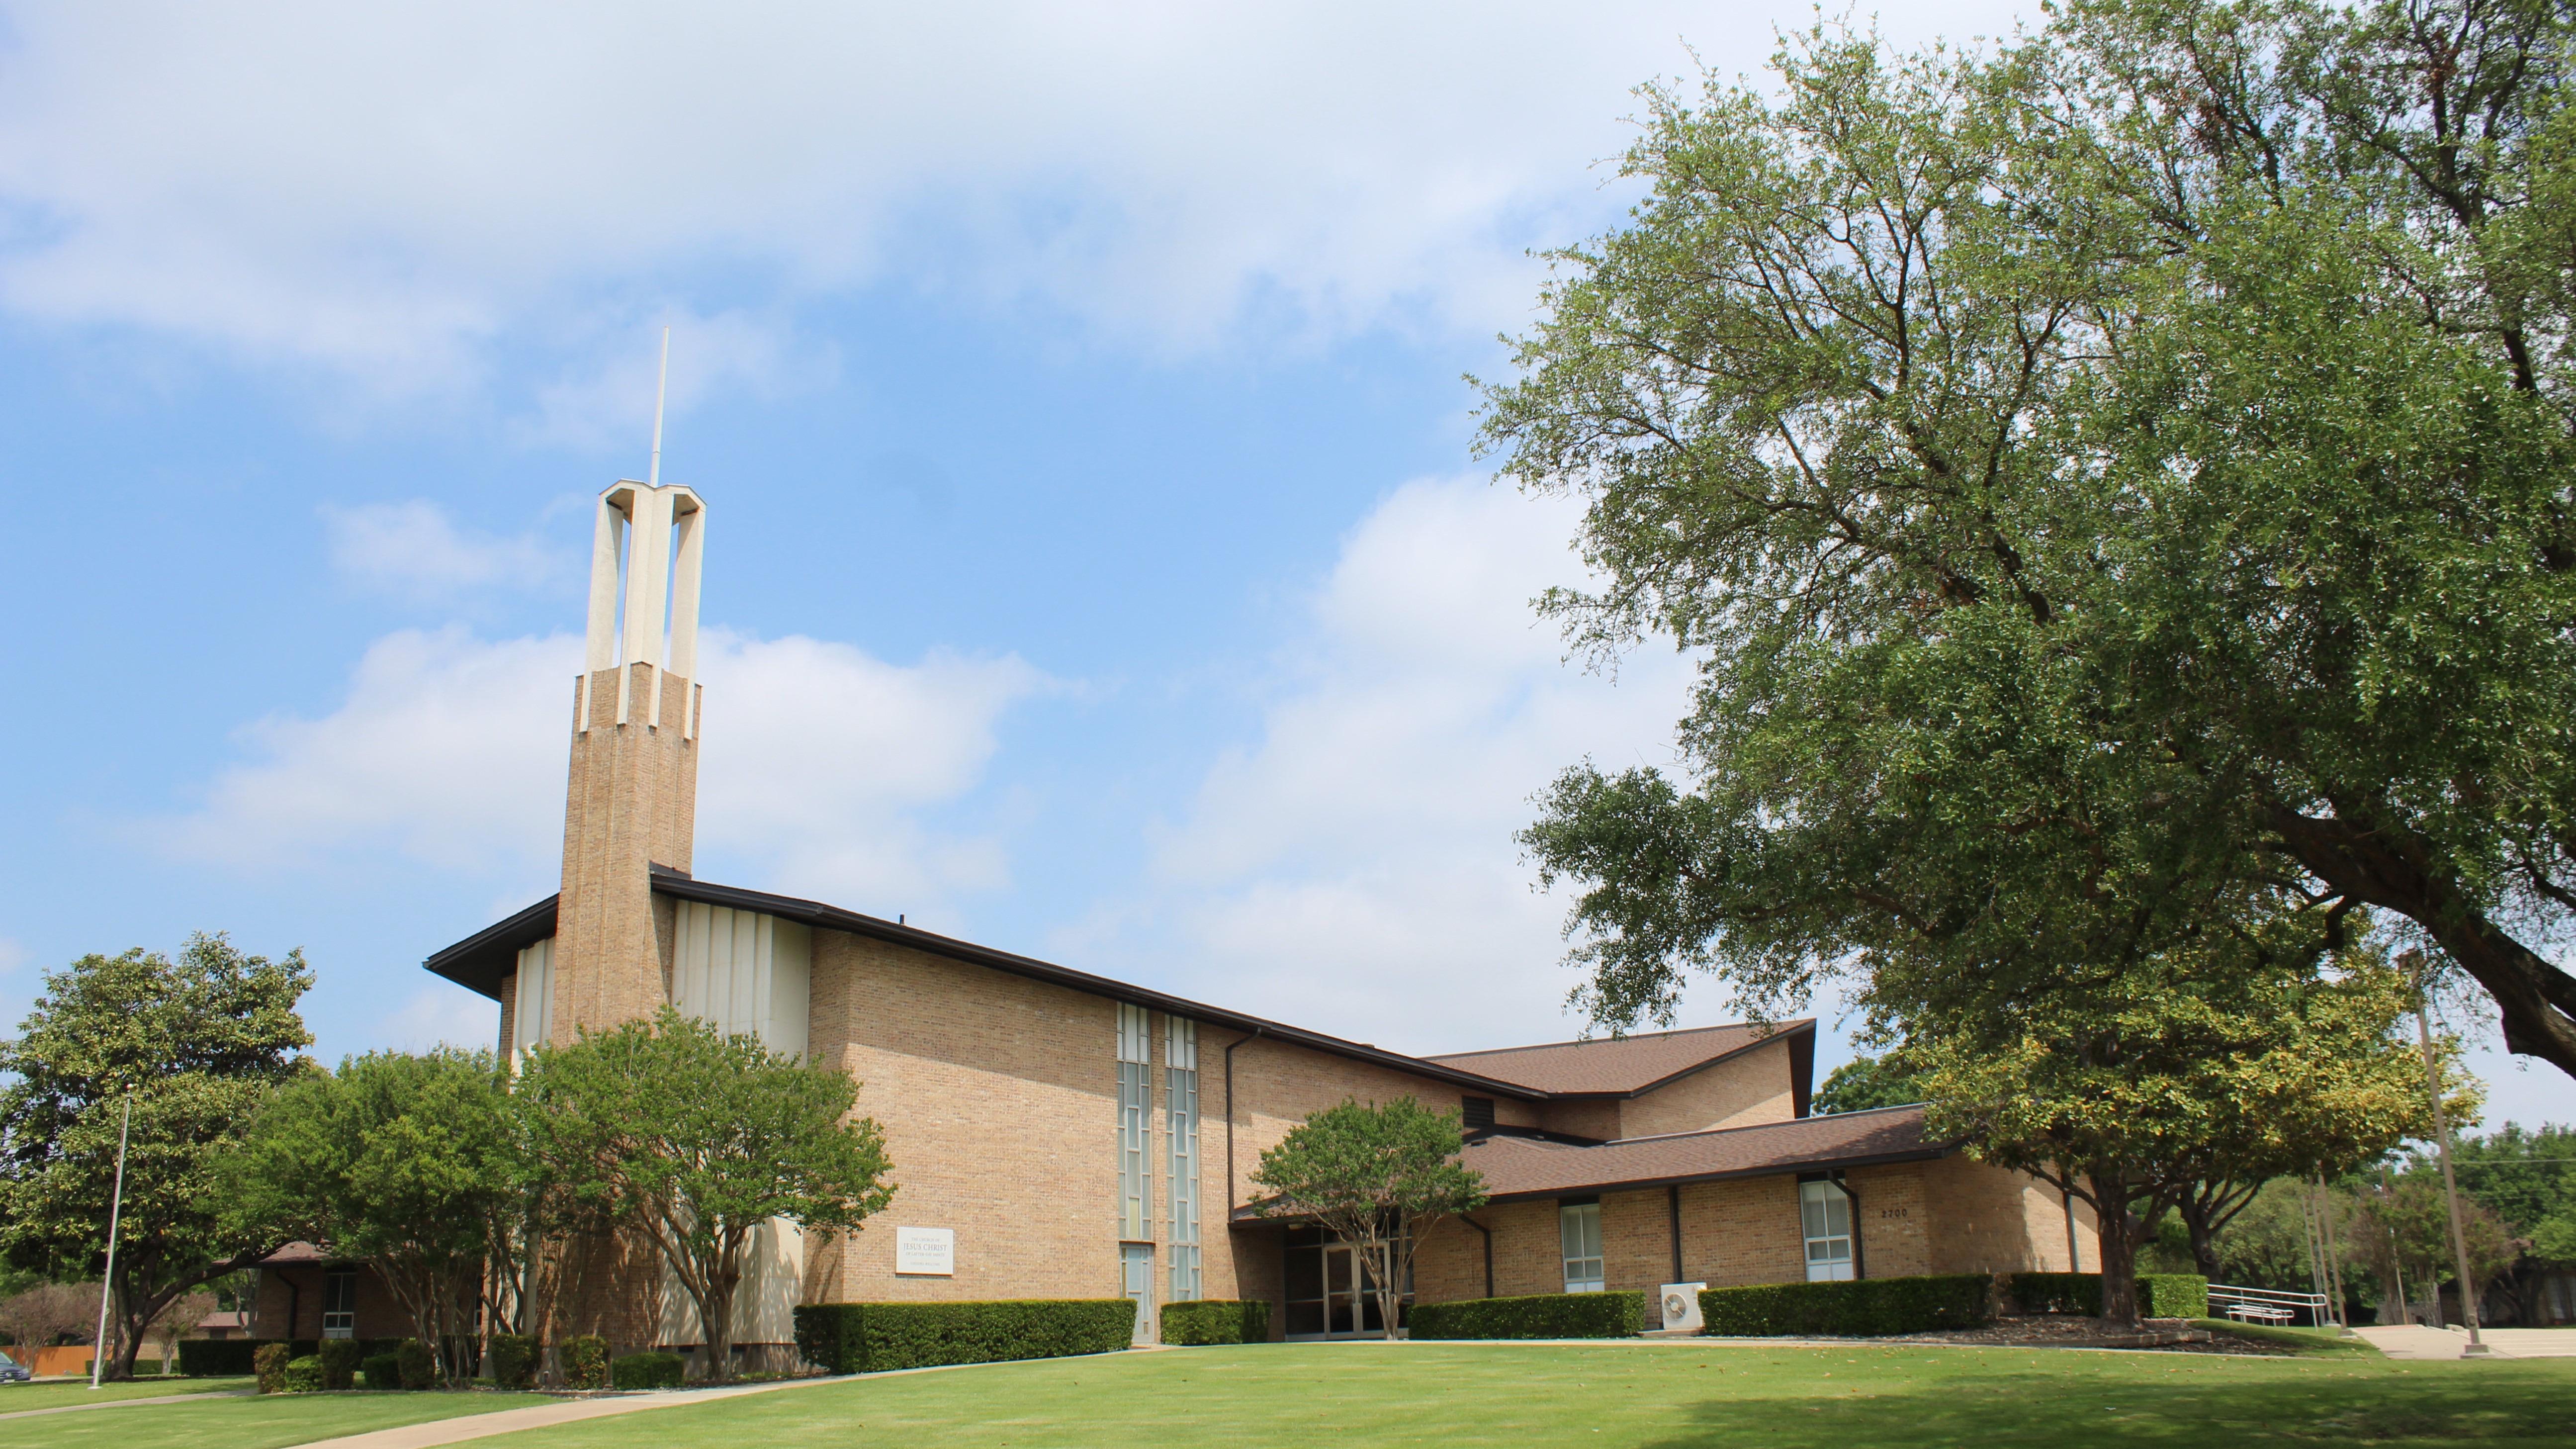 Plano Stake Center of The Church of Jesus Christ of Latter-day Saints located at 2700 Roundrock Trail in Plano Texas